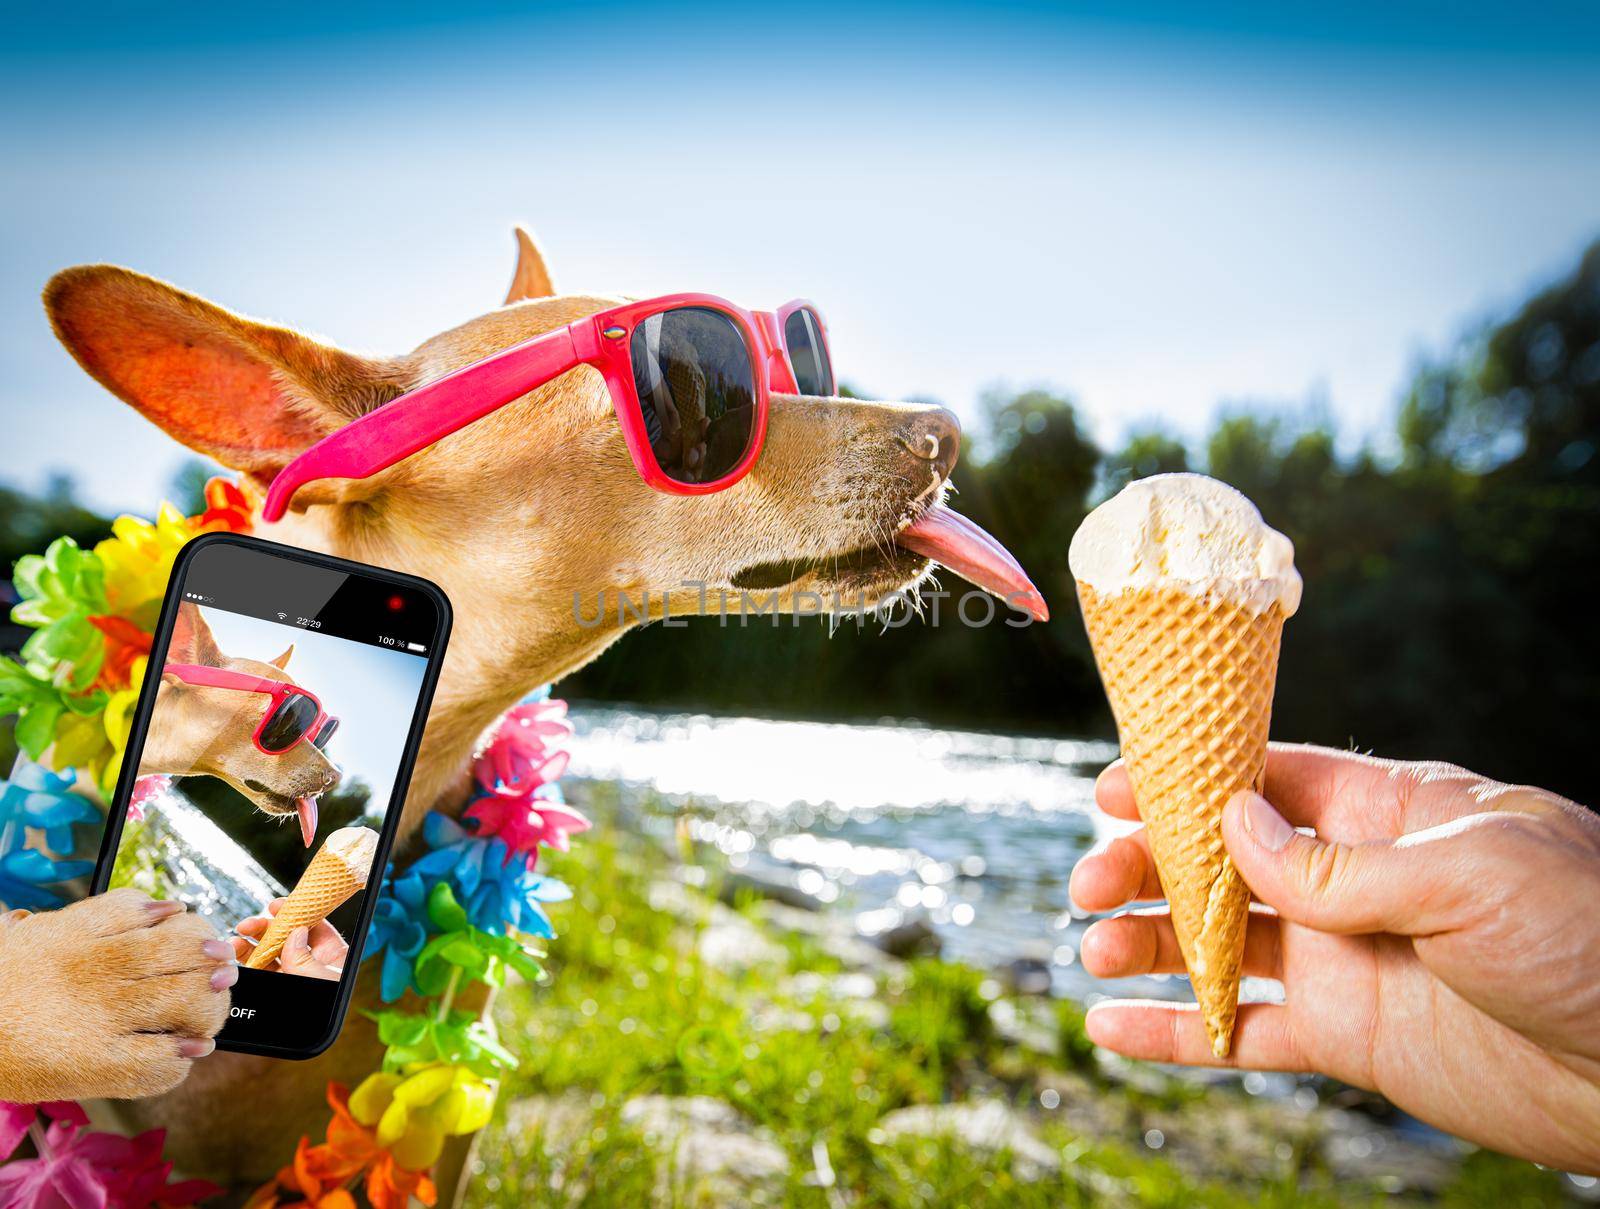 chihuahua  dog on   summer vacation holidays in the city and the beach and river   eating and licking   vanilla ice cream in cone waffle, taking a selfie with smartphone cellular telephone